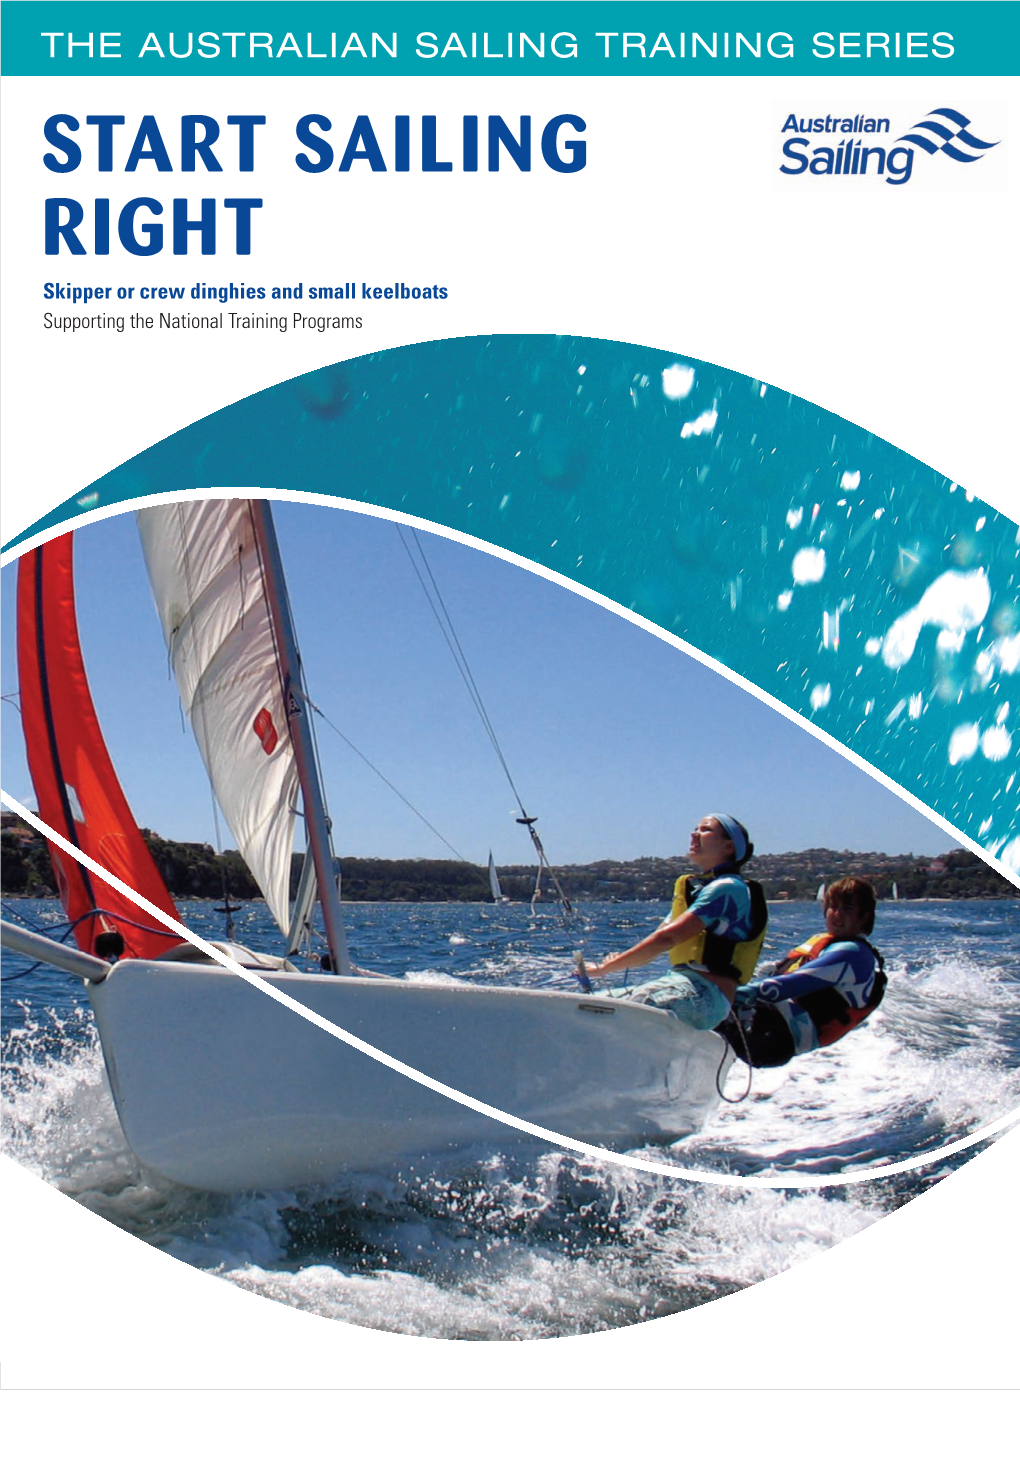 START SAILING RIGHT Skipper Or Crew Dinghies and Small Keelboats Supporting the National Training Programs Want to Pursue a Passion? Get Involved